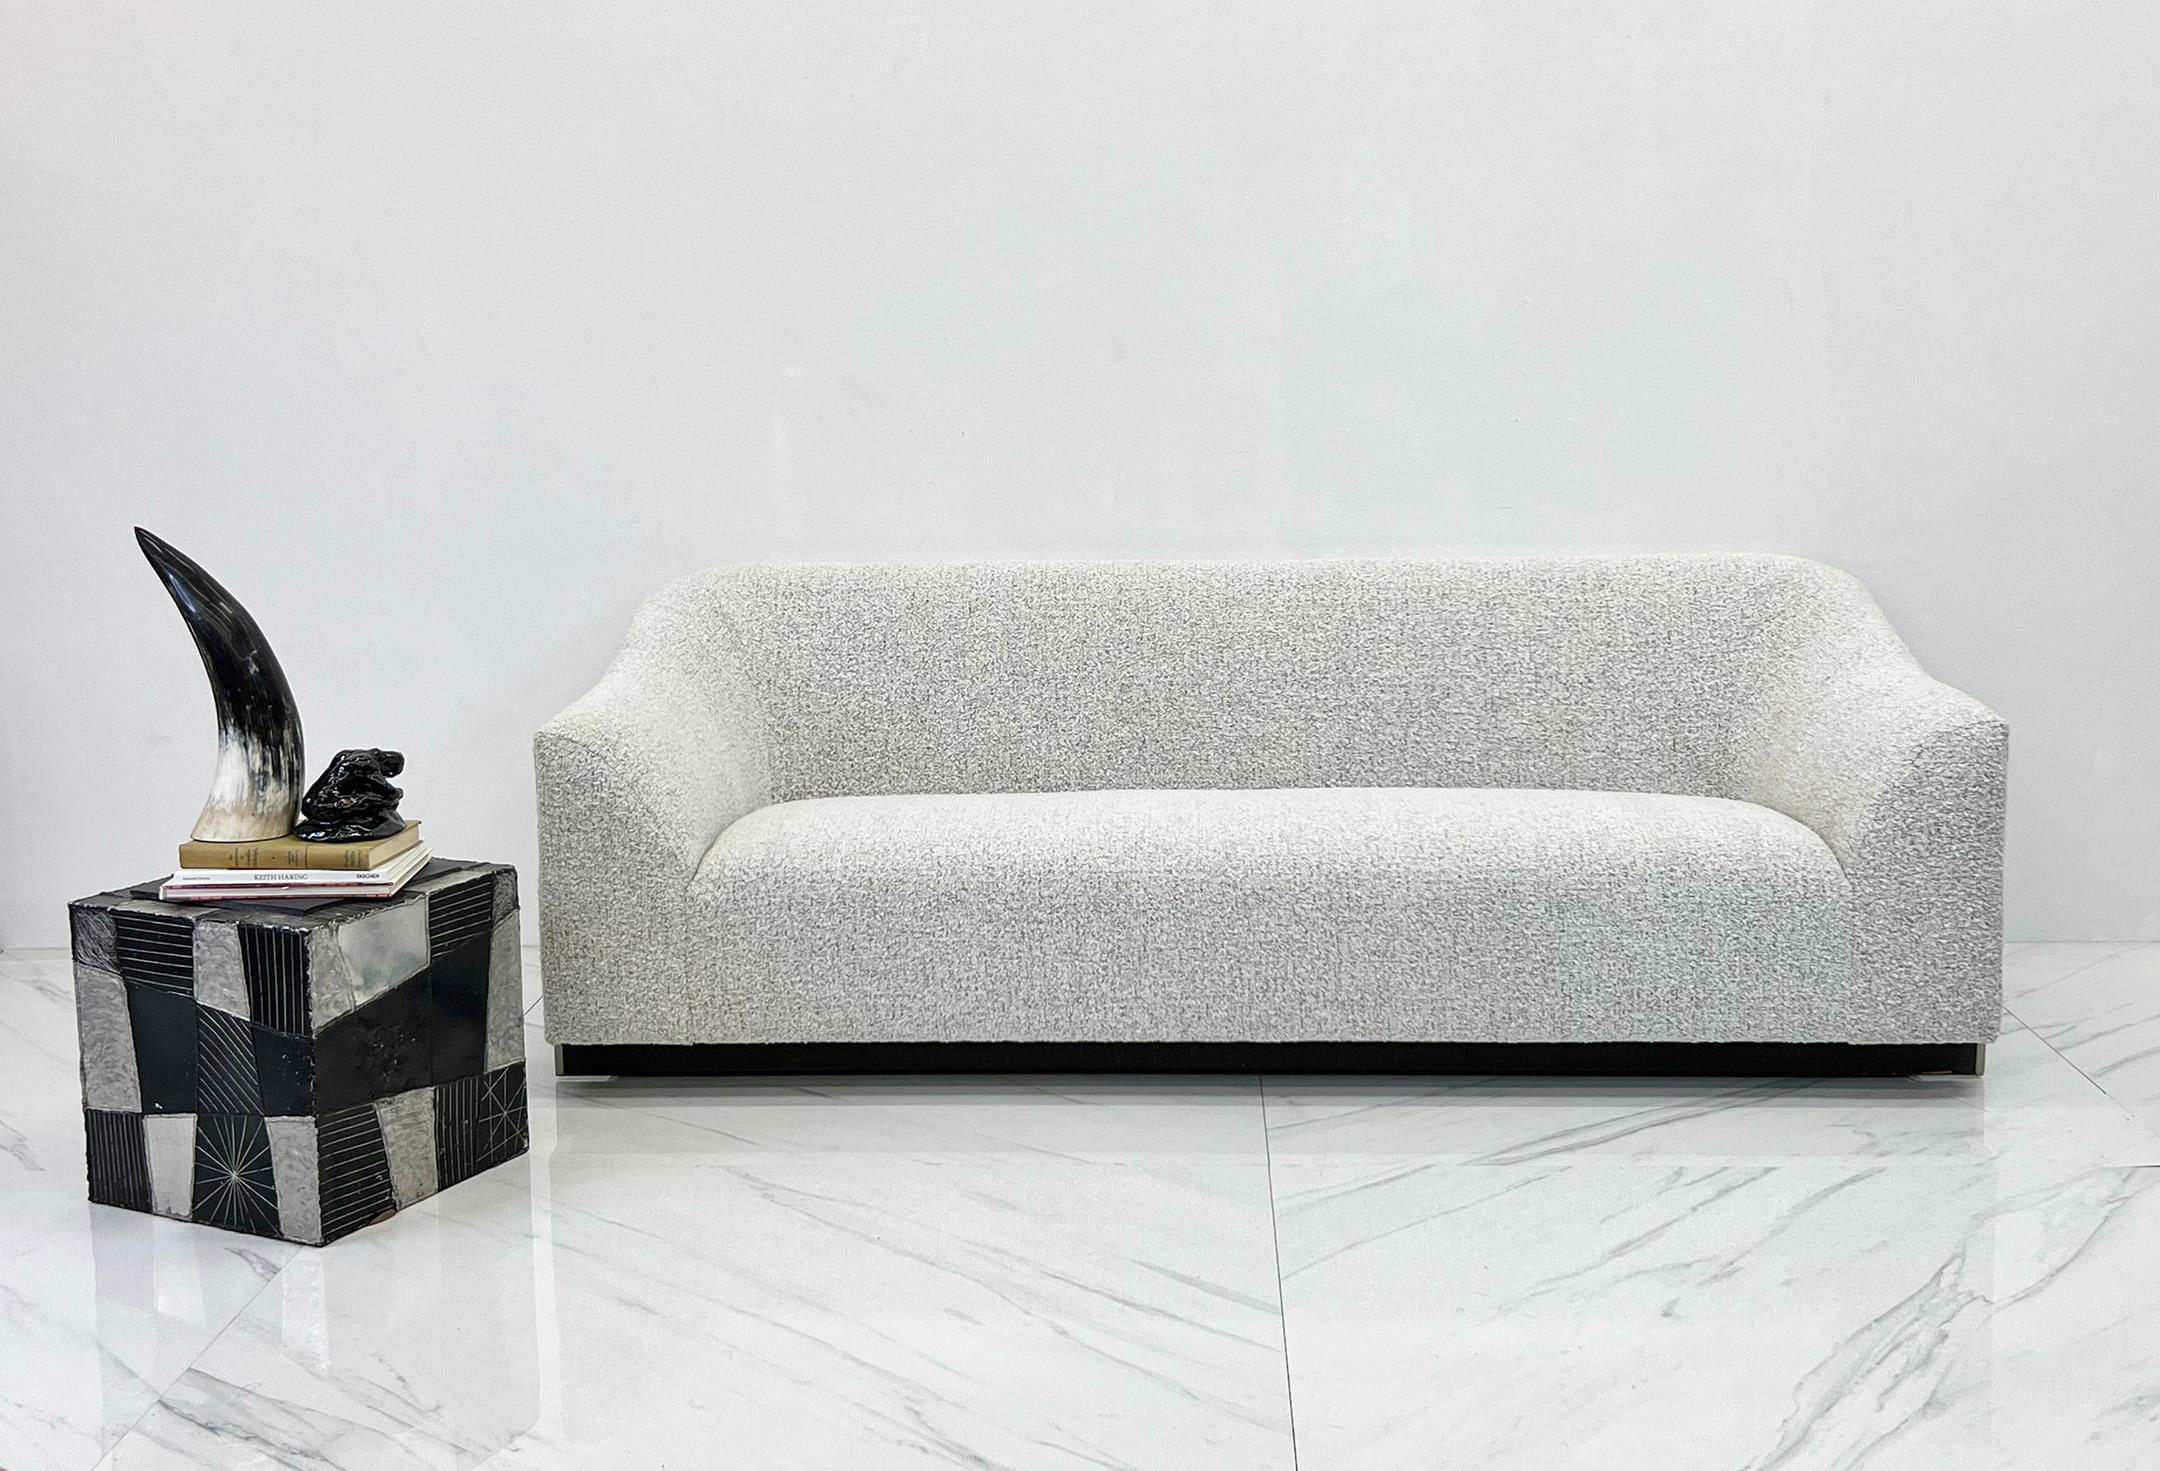 This Eric Jourdan for Ligne Roset Snowdonia sofa upholstered in two-tone black stitch and white boucle is a stunning piece of modern furniture that adds a touch of sophistication and elegance to any contemporary living space.

The Snowdonia sofa's